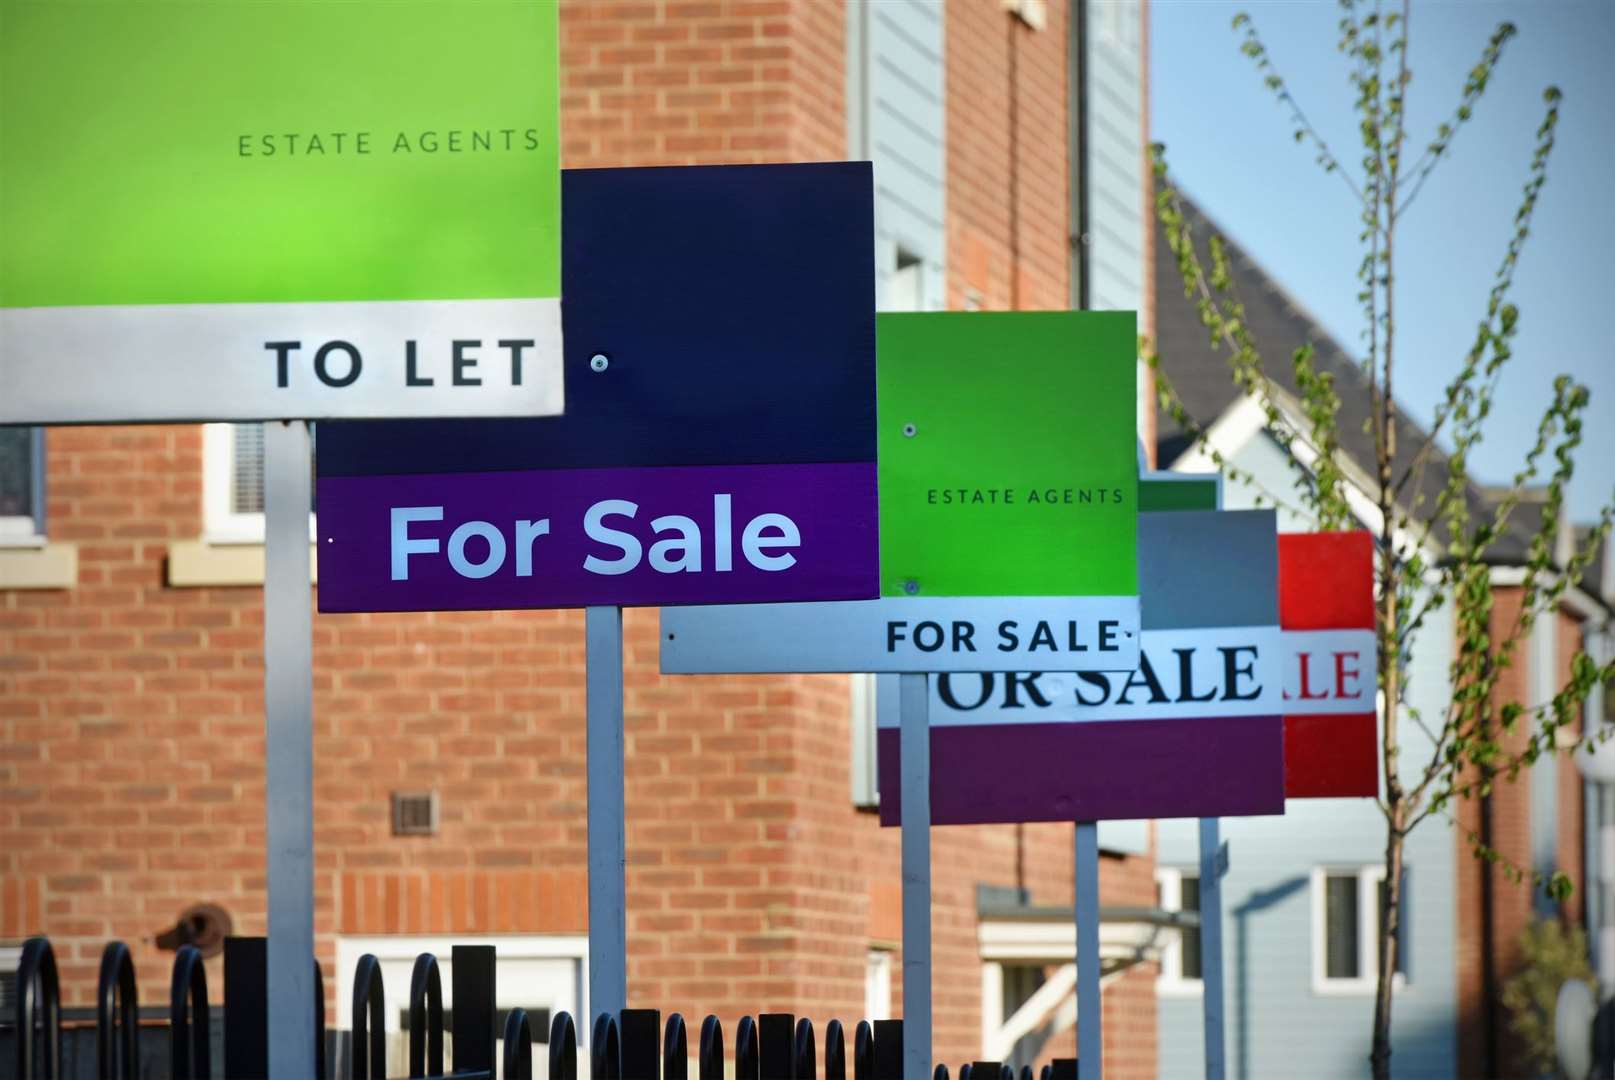 More and more landlords are selling up their properties – putting a strain on the rental market